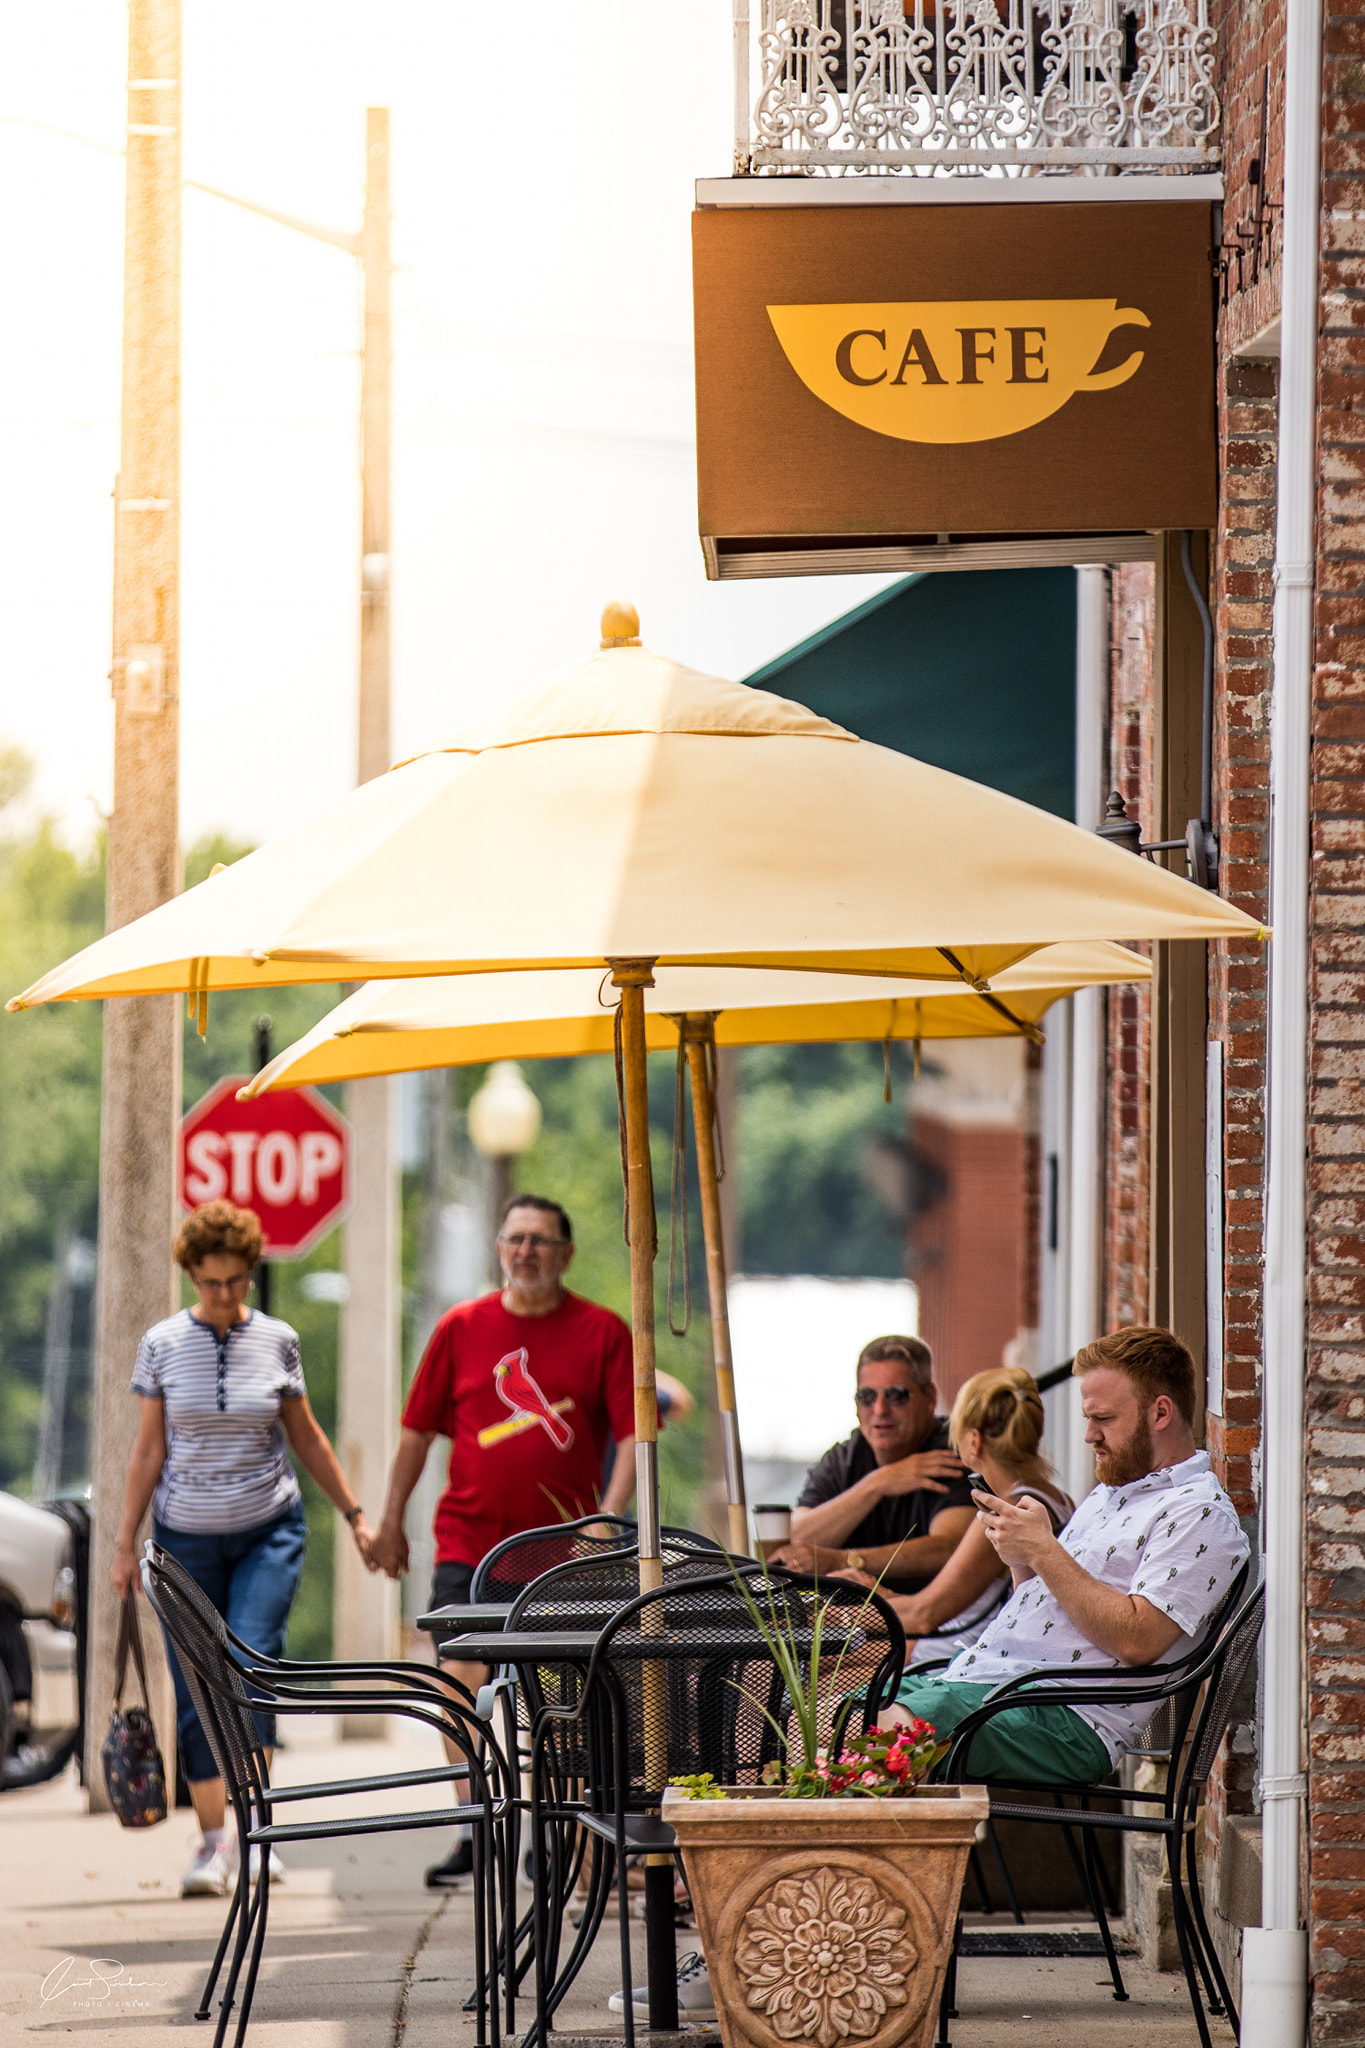 Our walkable downtown has so many delicious restaurants to try, many with outdoor seating.